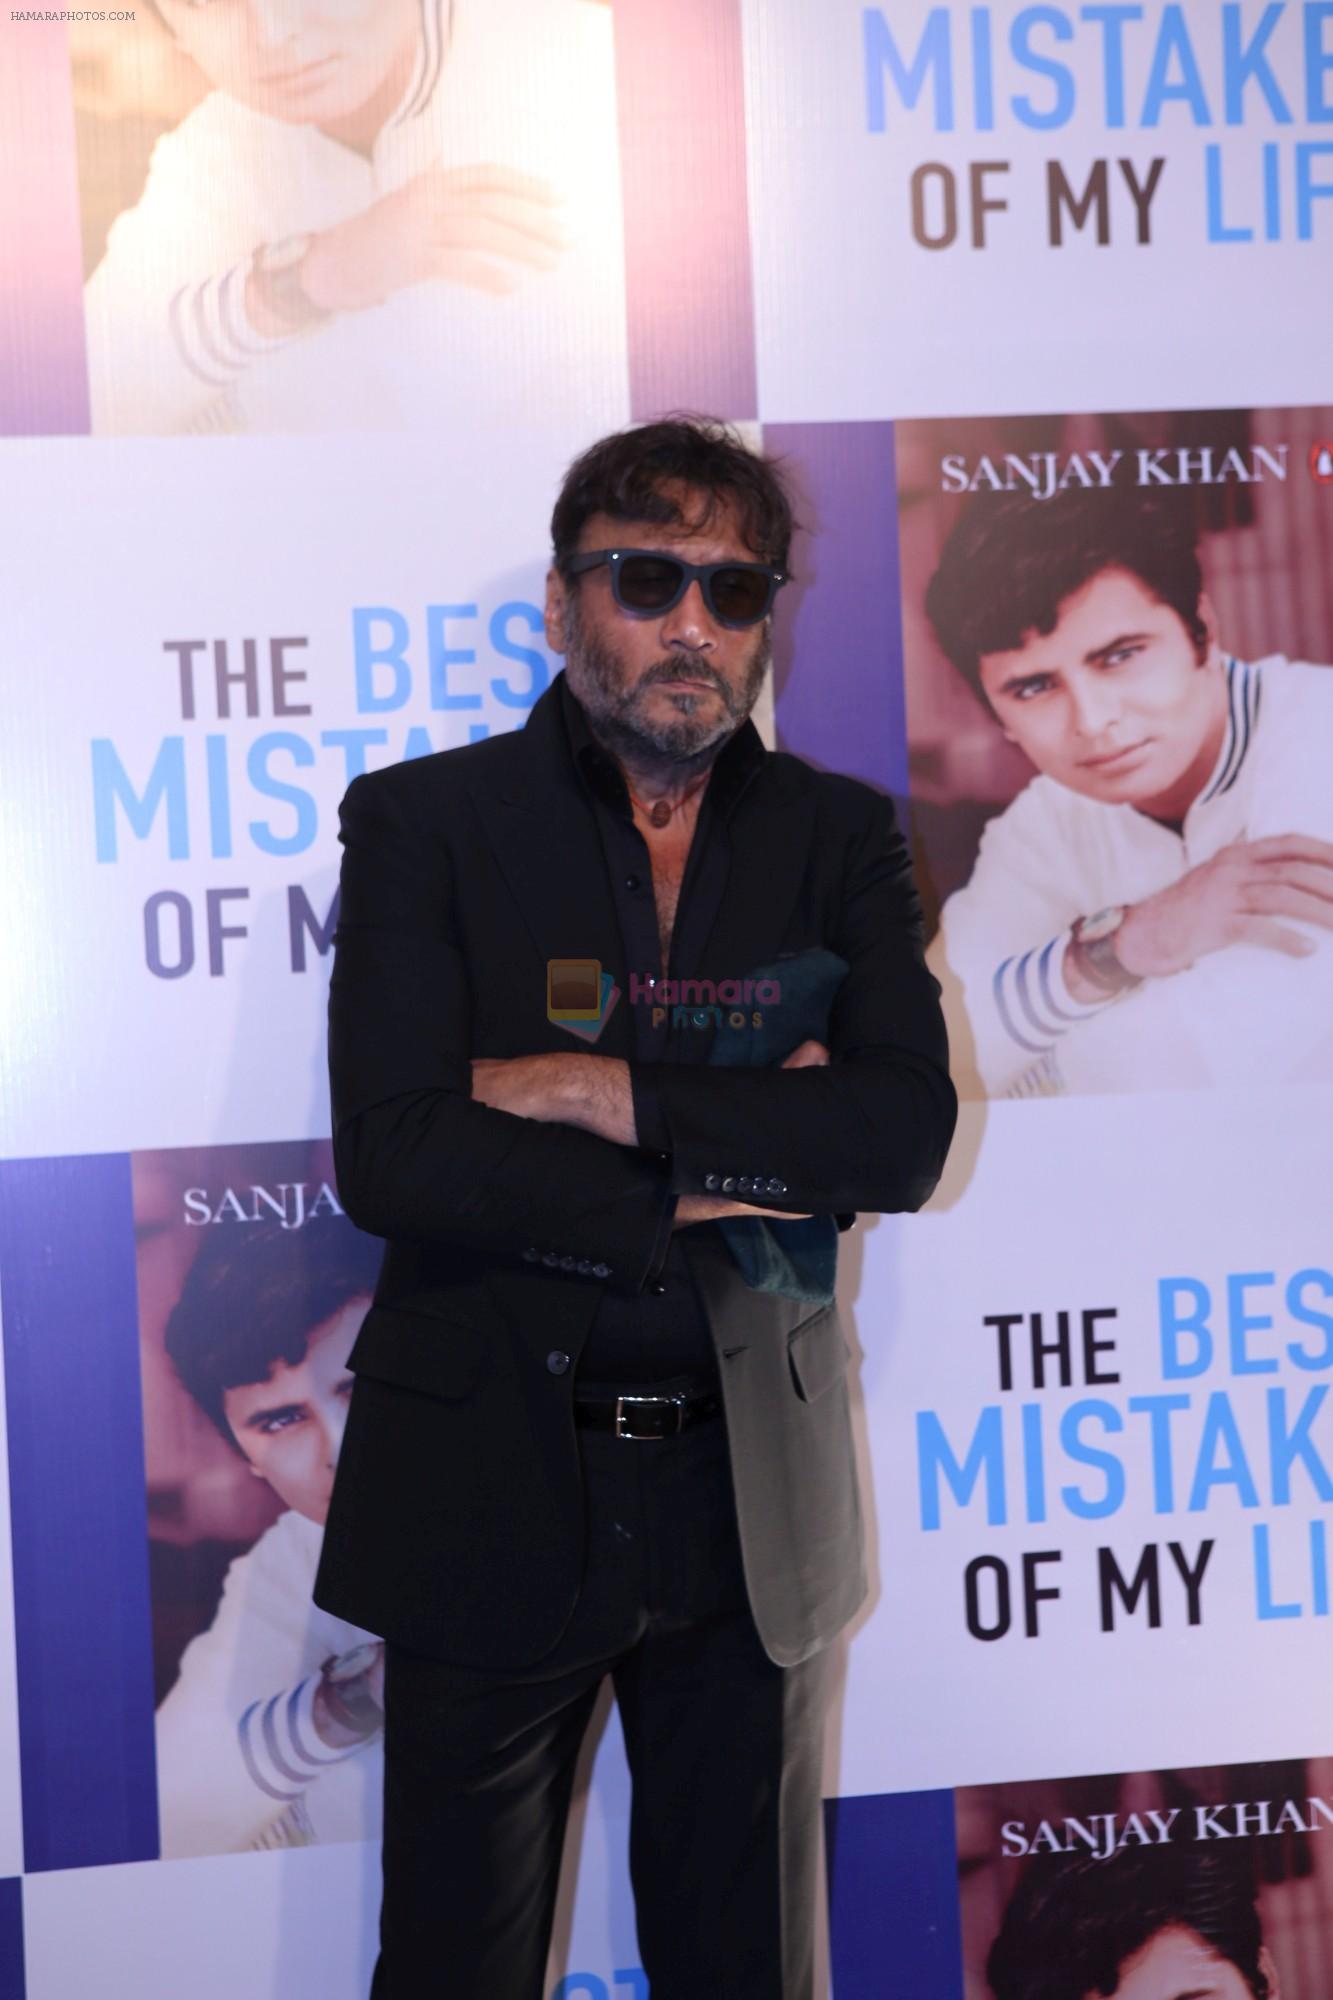 Jackie Shroff at the Launch Of Sanjay Khan's Book The Best Mistakes Of My Life in Mumbai on 28th Oct 2018